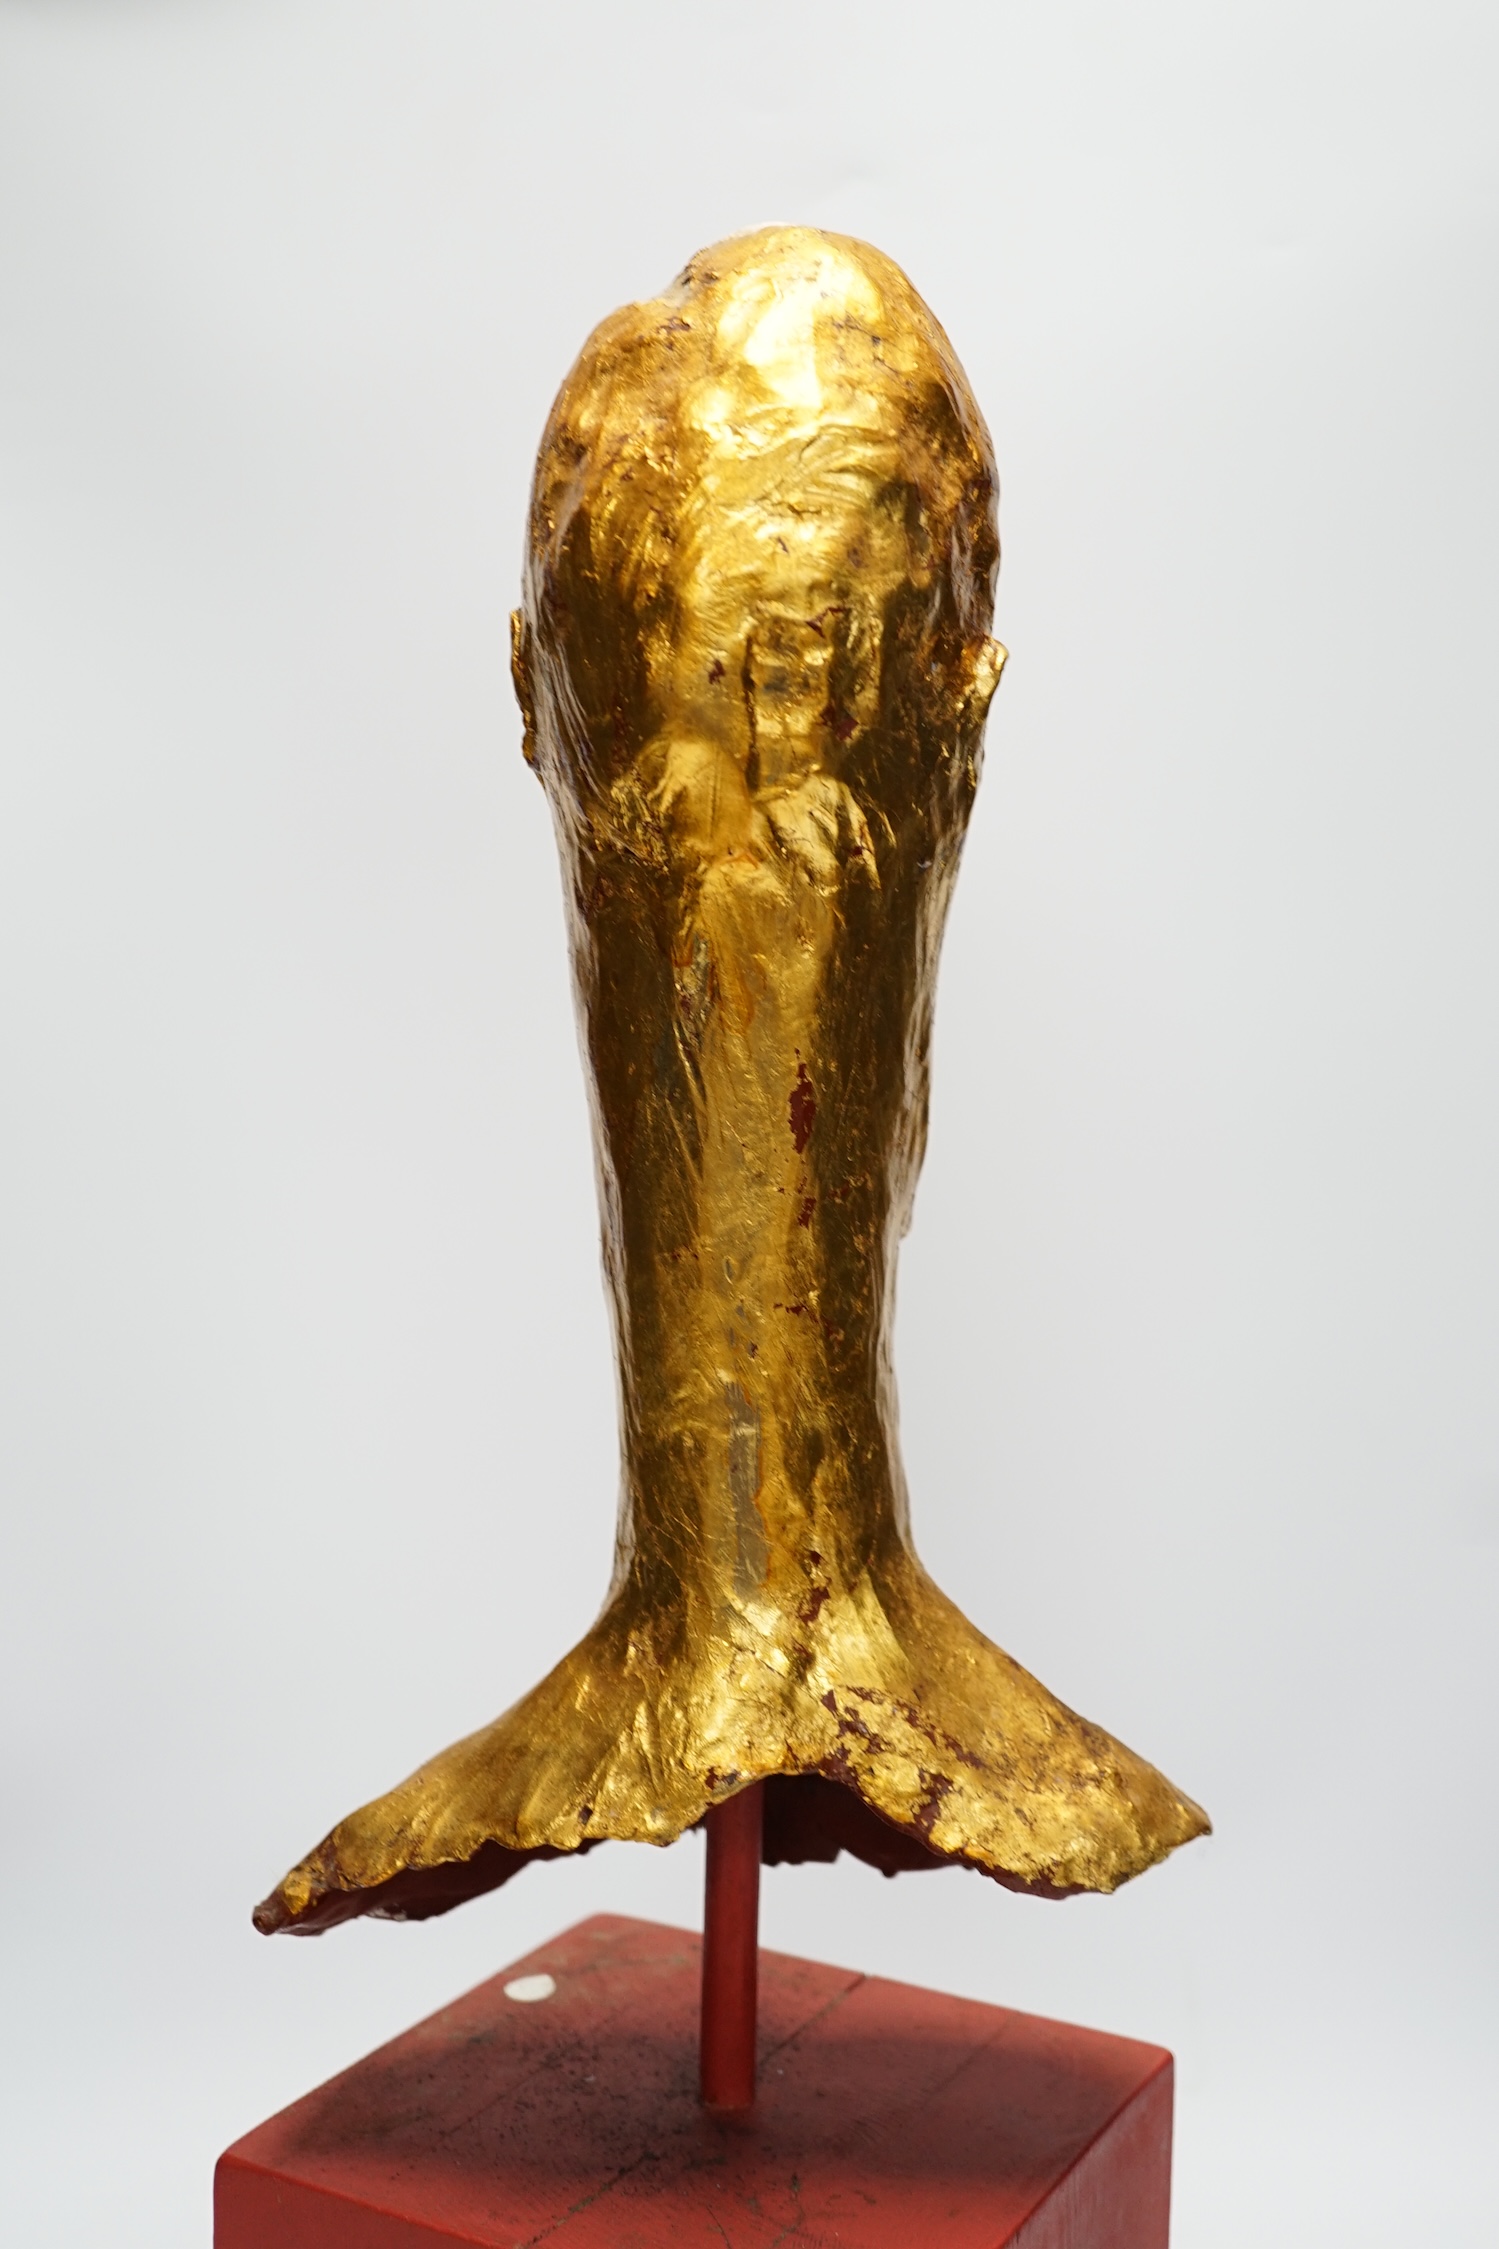 Simon Toone (b.1967), a gilt plaster model of a gentleman’s head on wooden stand, 57cm total - Image 4 of 4